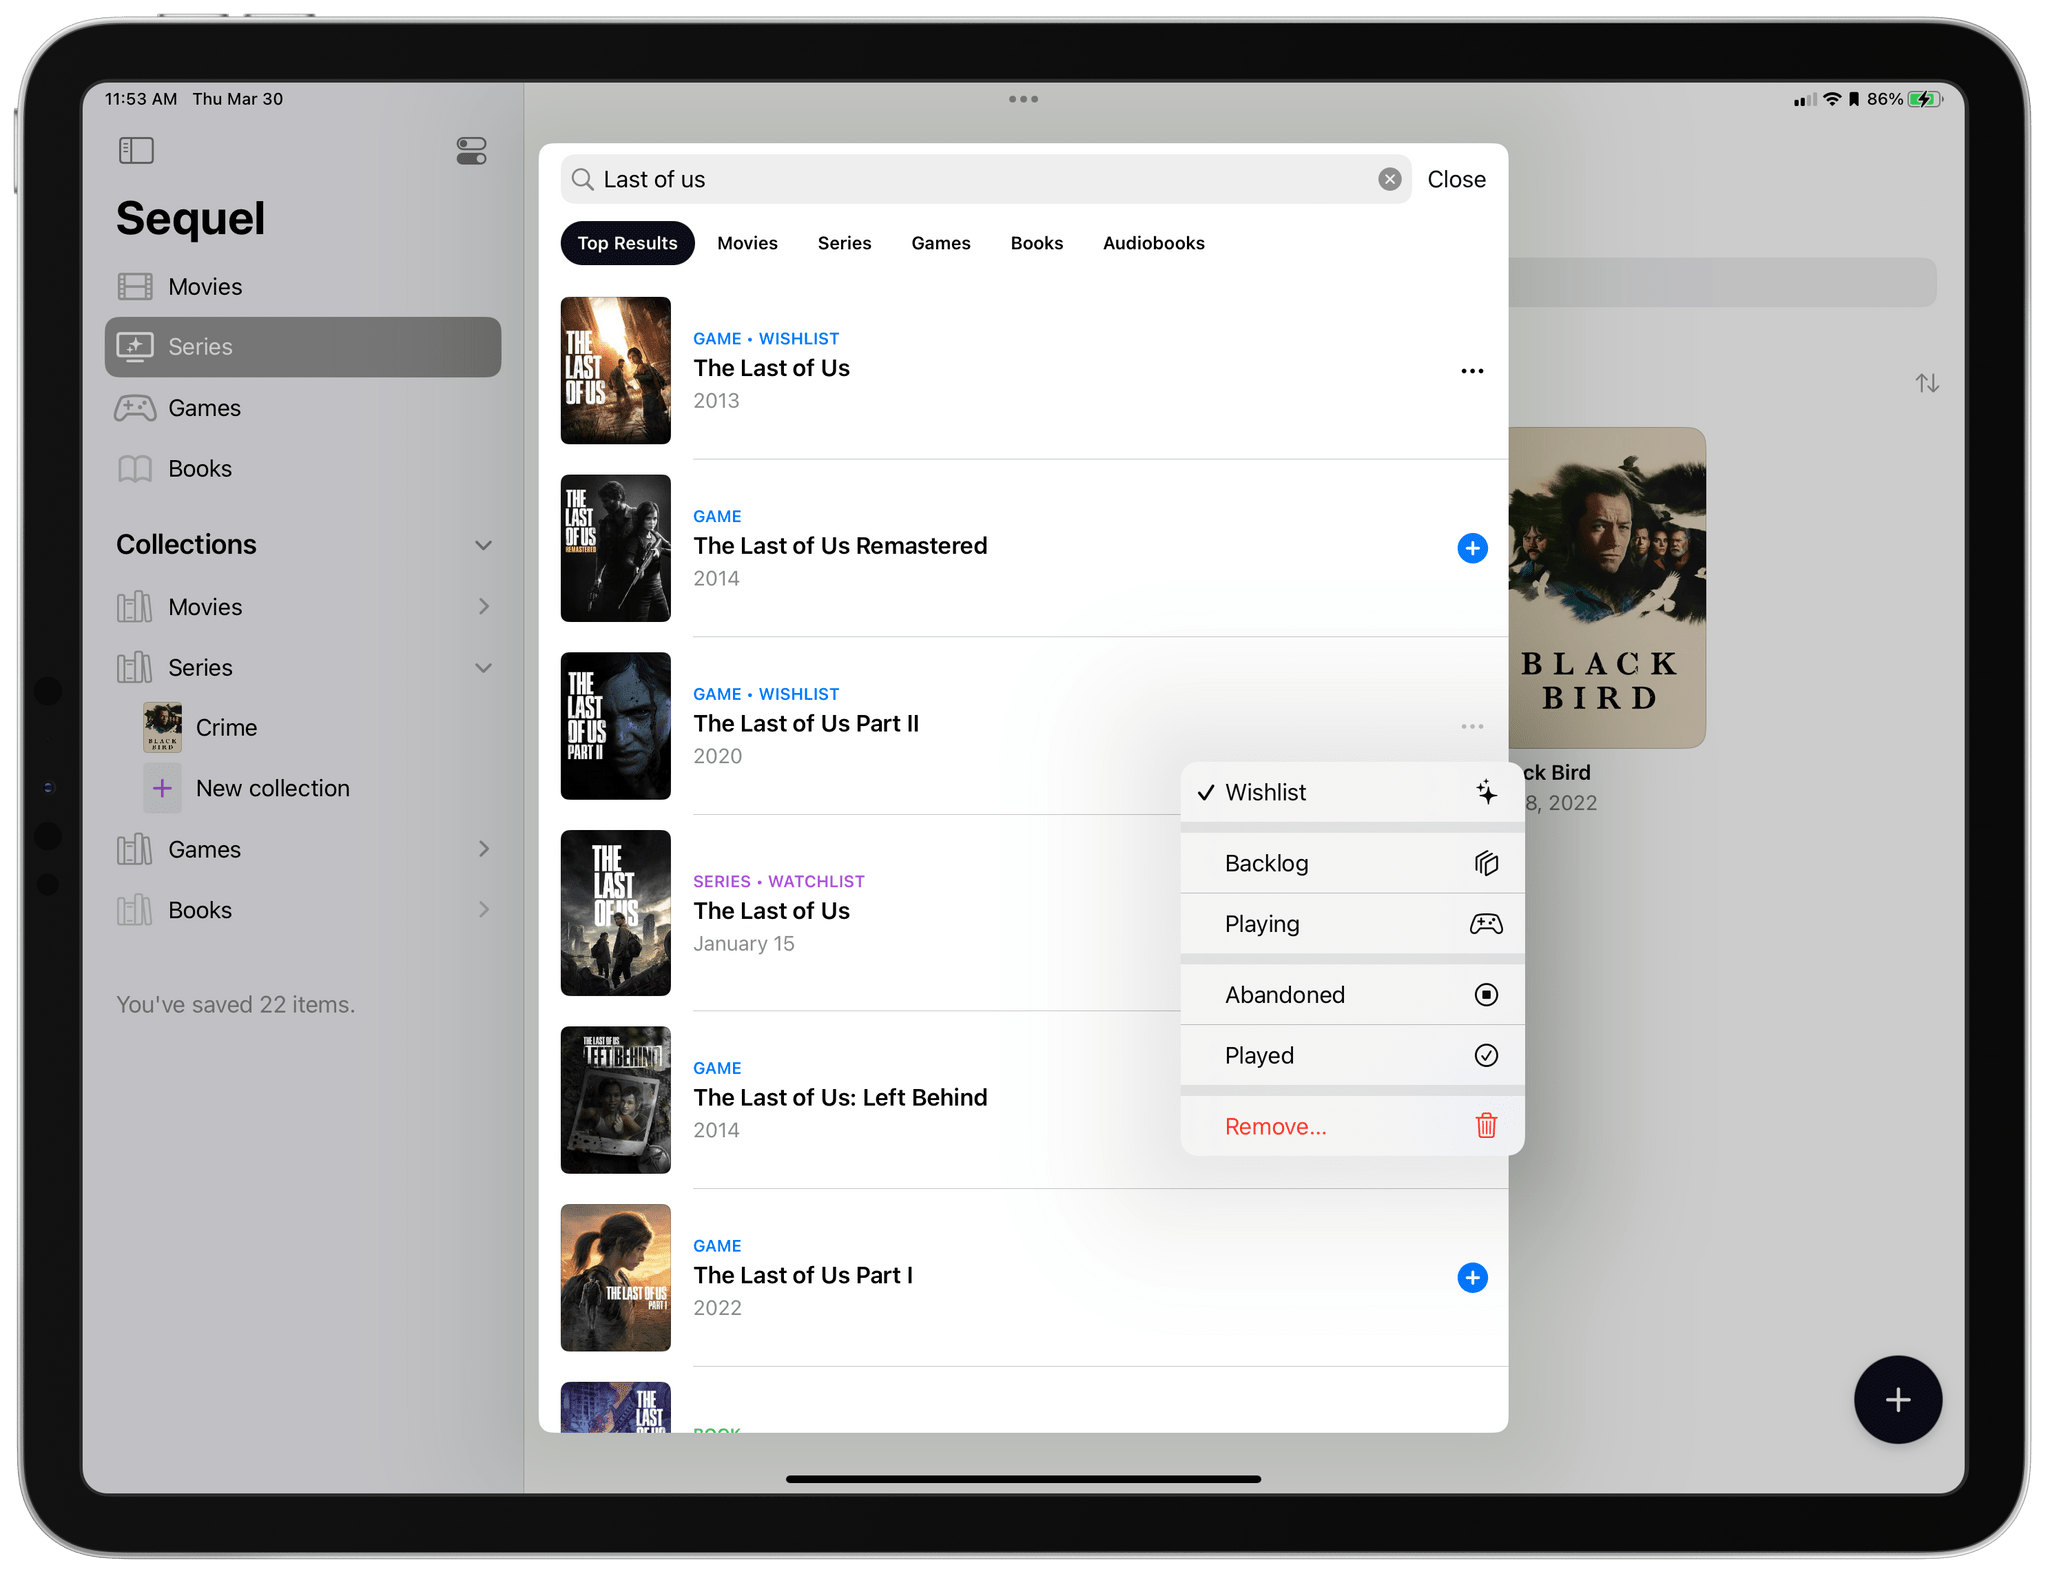 An item's menu button makes it easy to move it to another list.